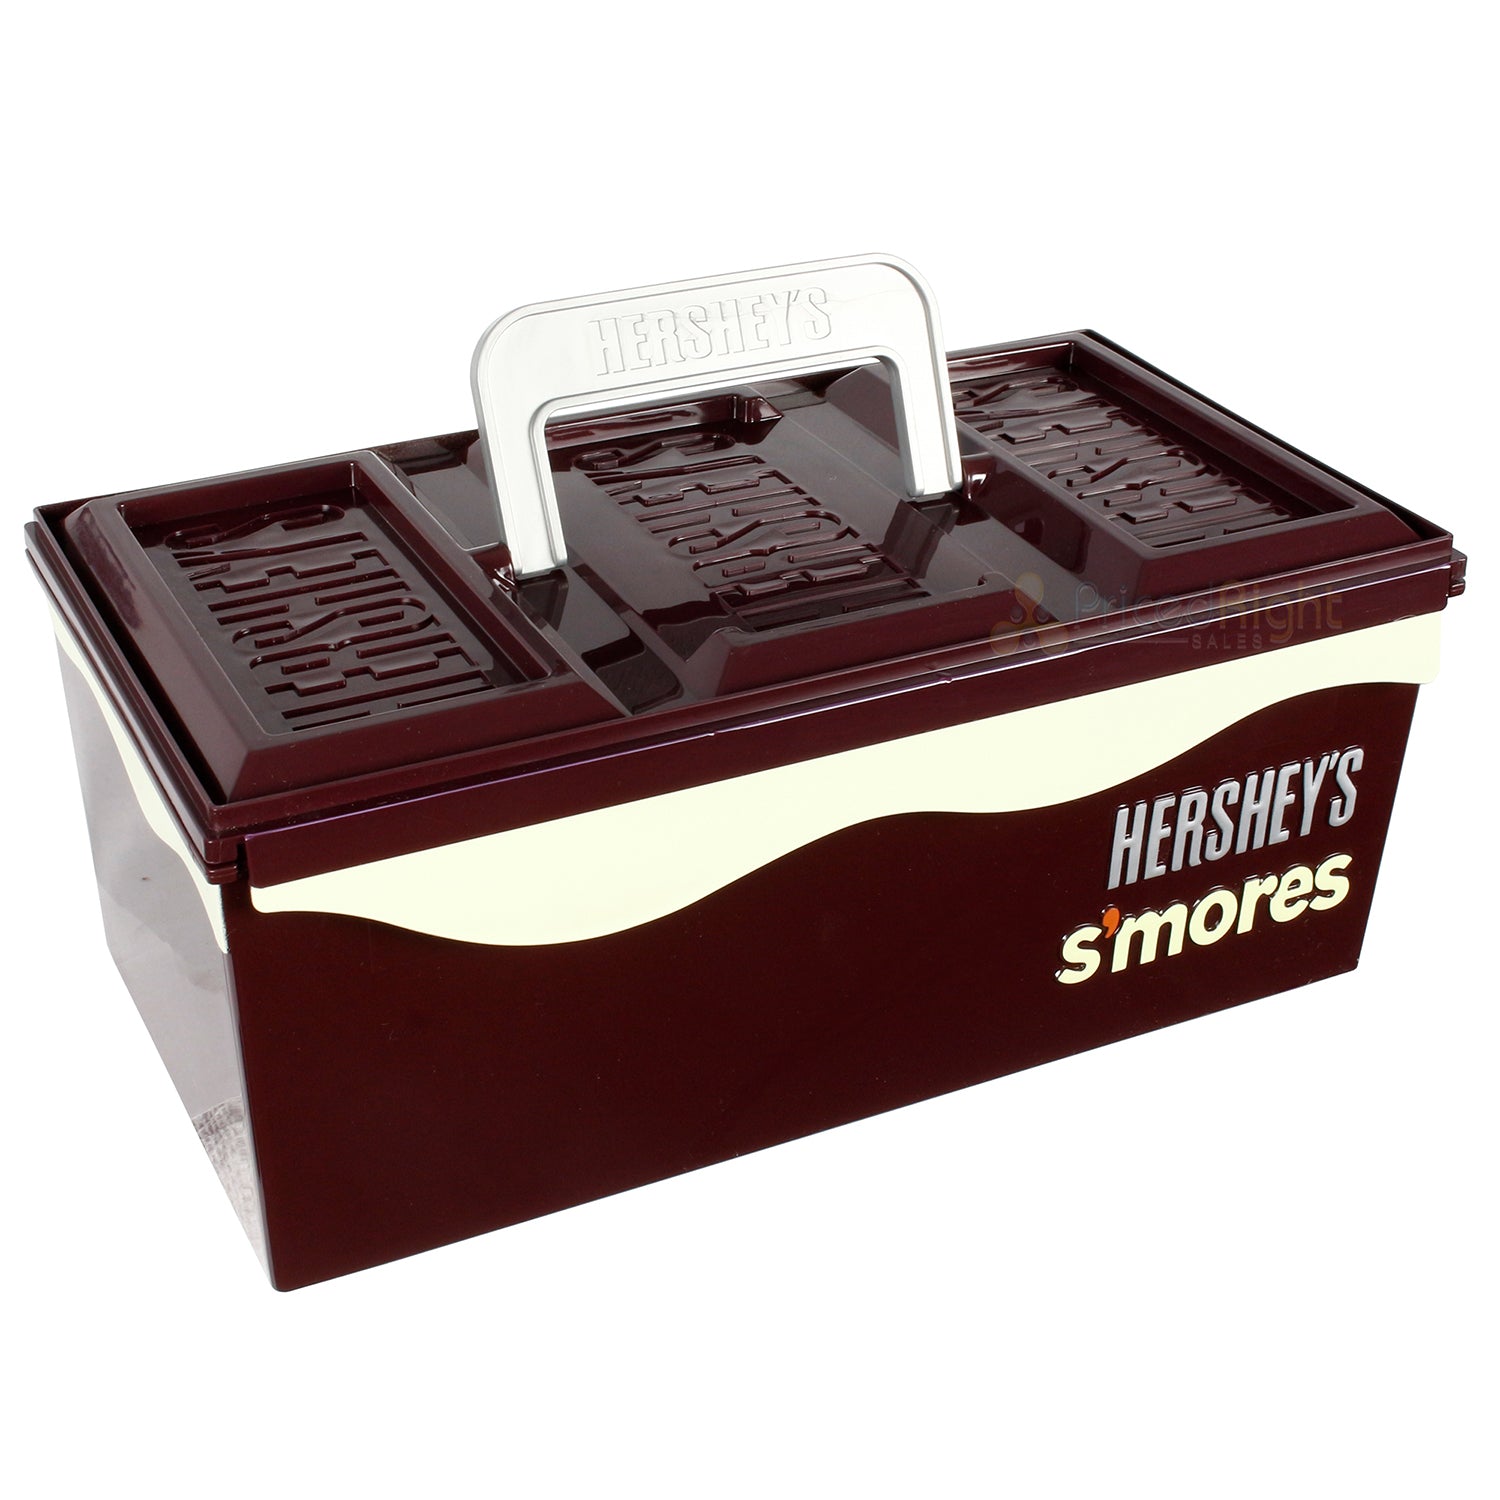 Hershey's S'mores Gift Set